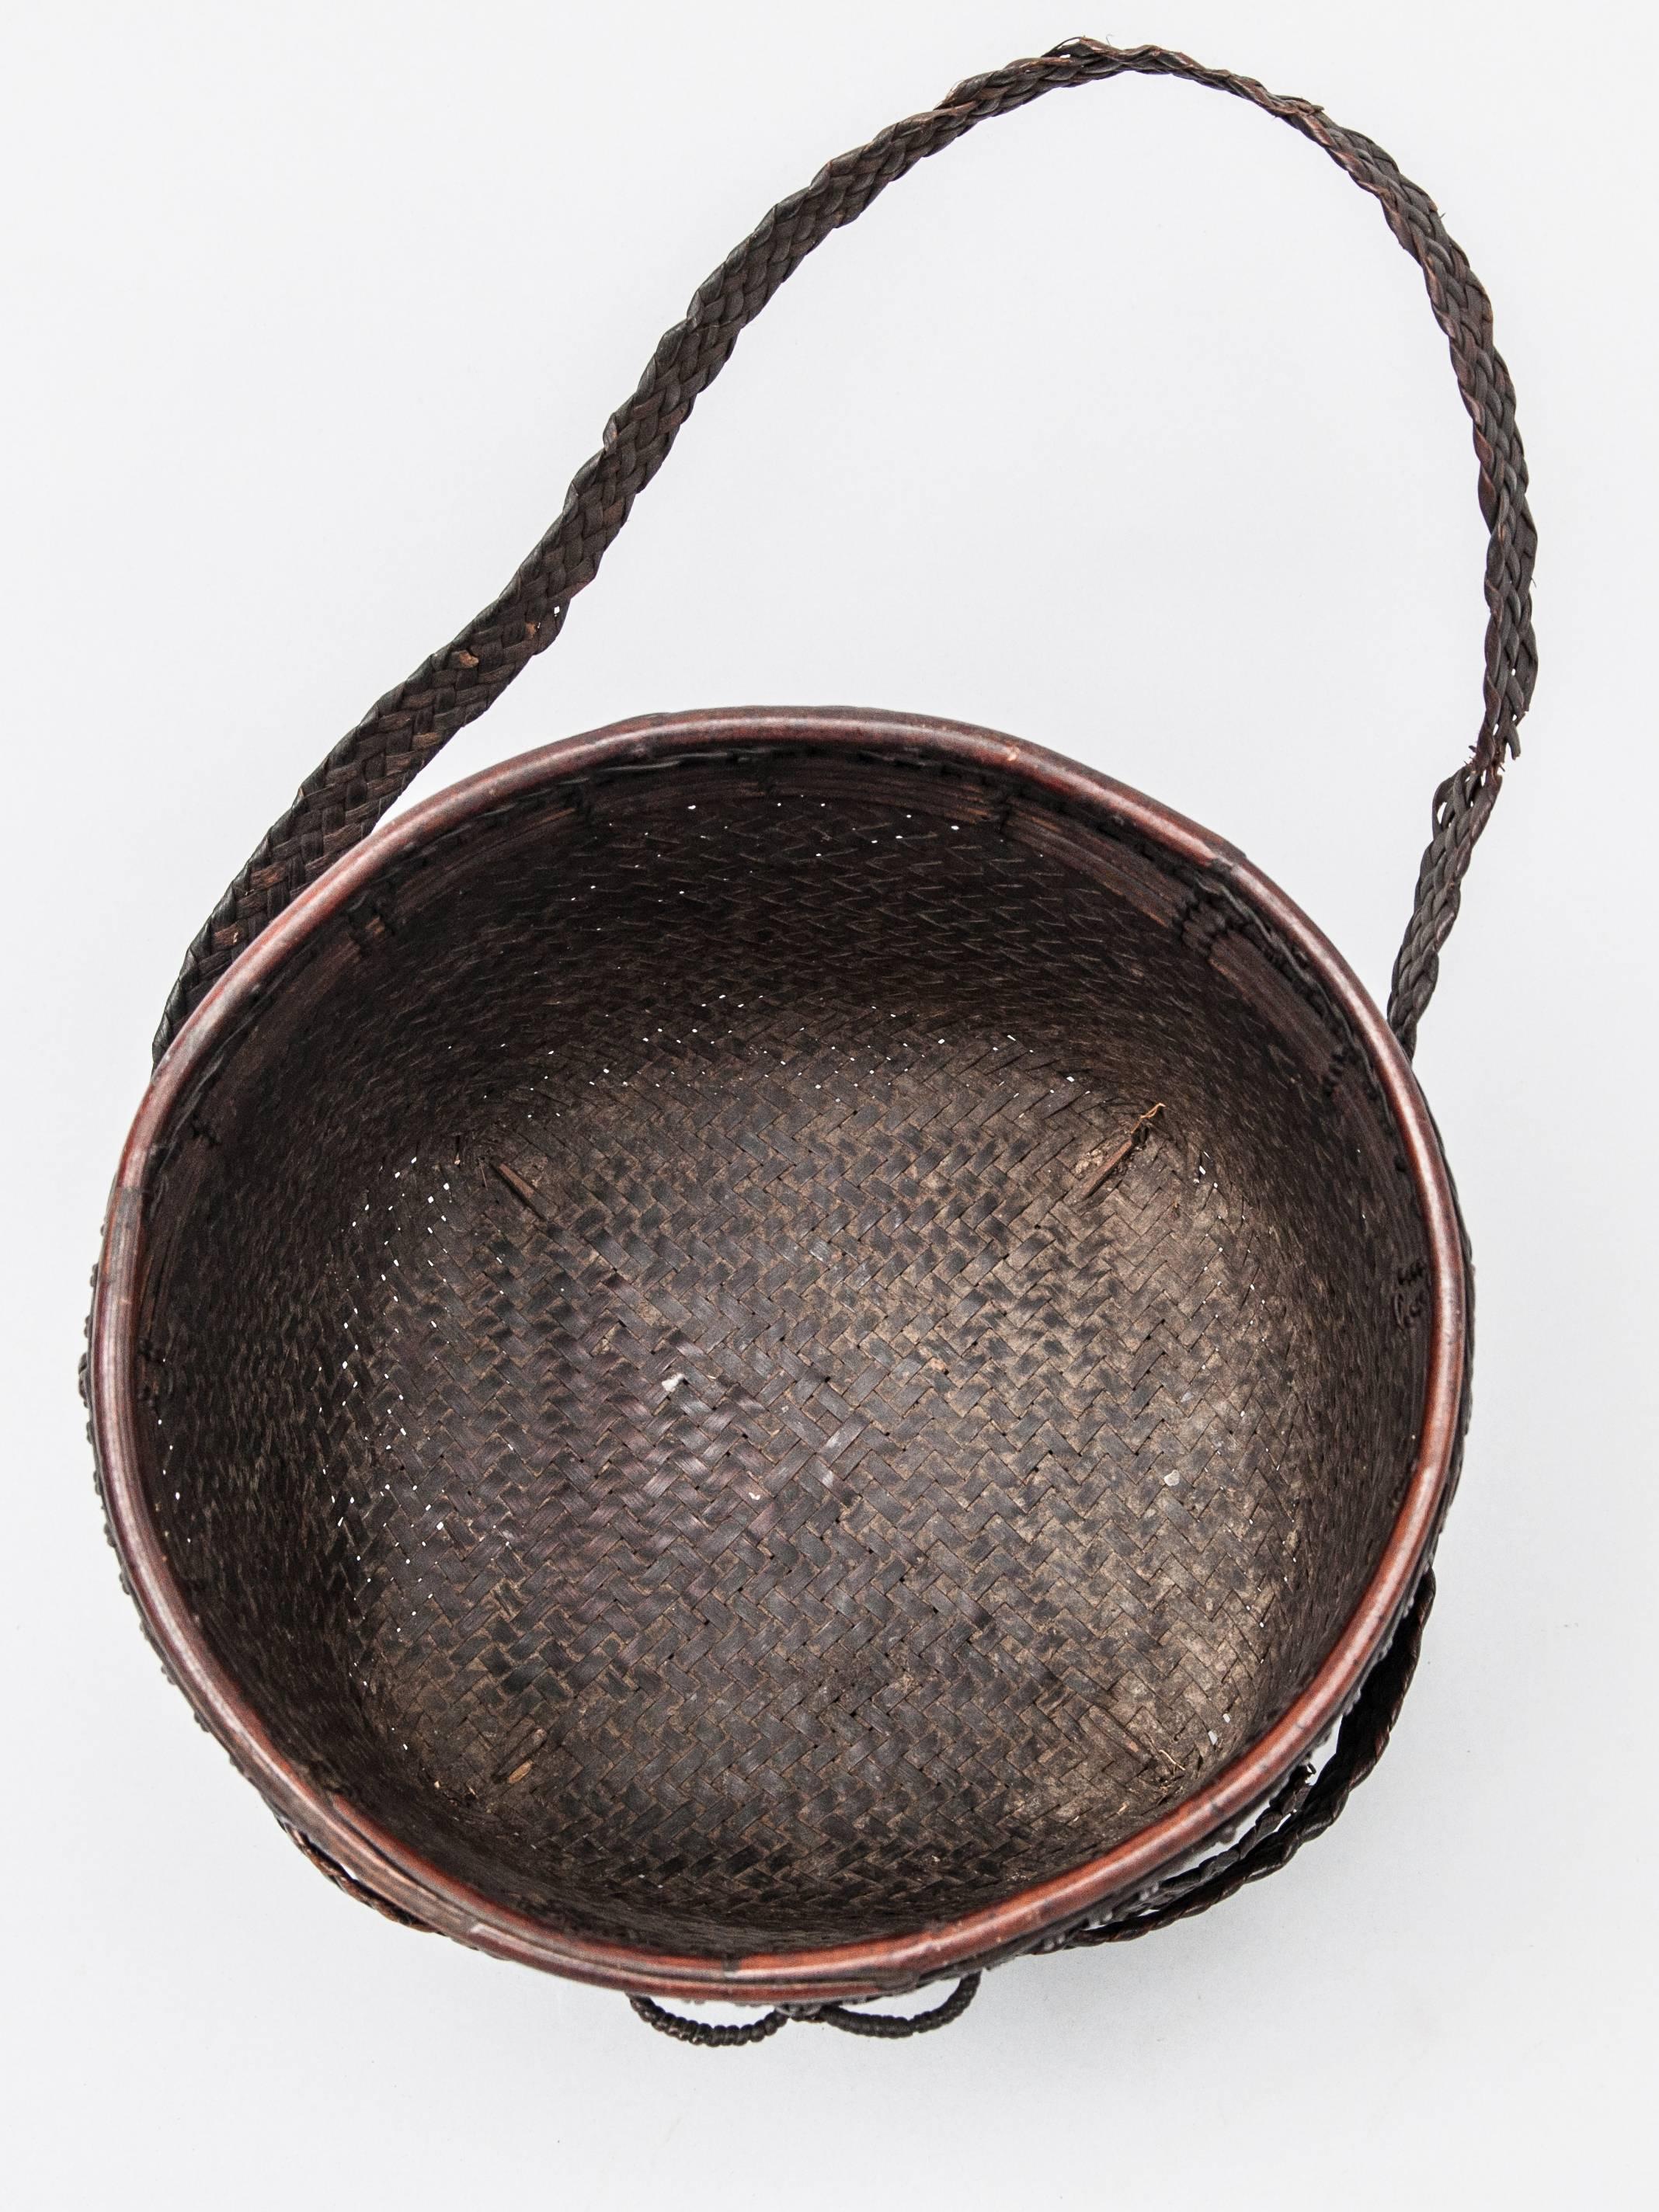 Tribal Collecting Basket from Ata Pue Area of Laos, Mid-20th Century, Bamboo, Rattan